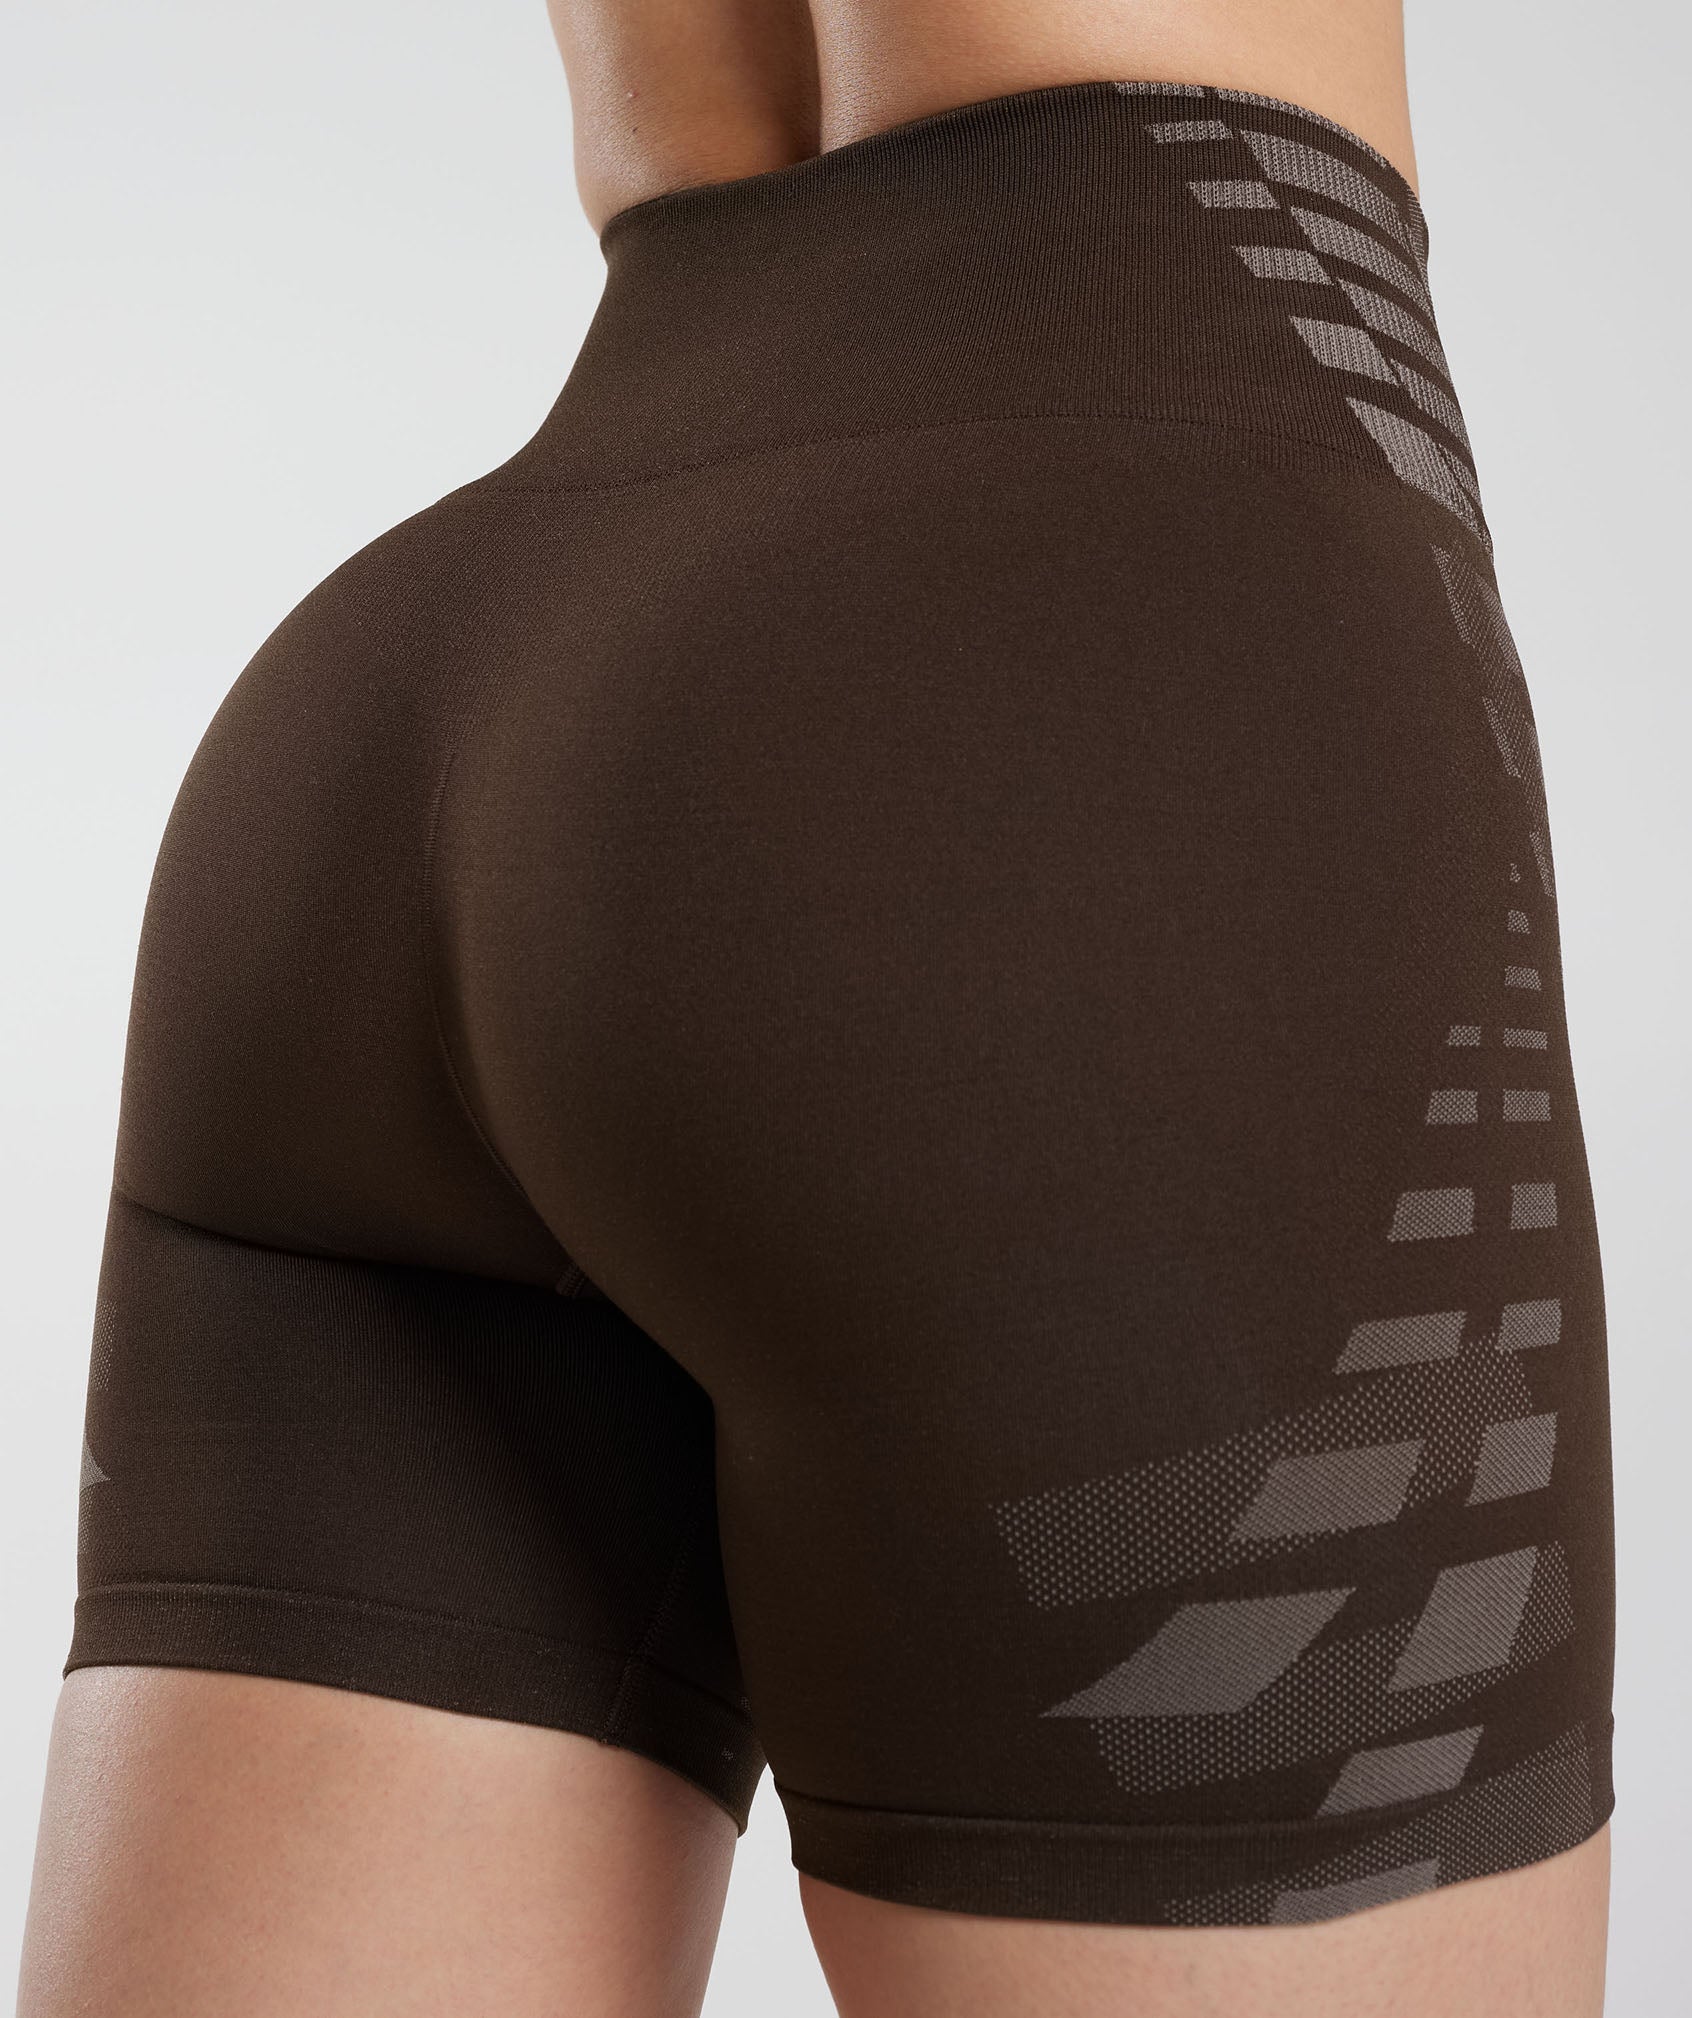 Apex Limit Shorts in Archive Brown/Truffle Brown - view 6